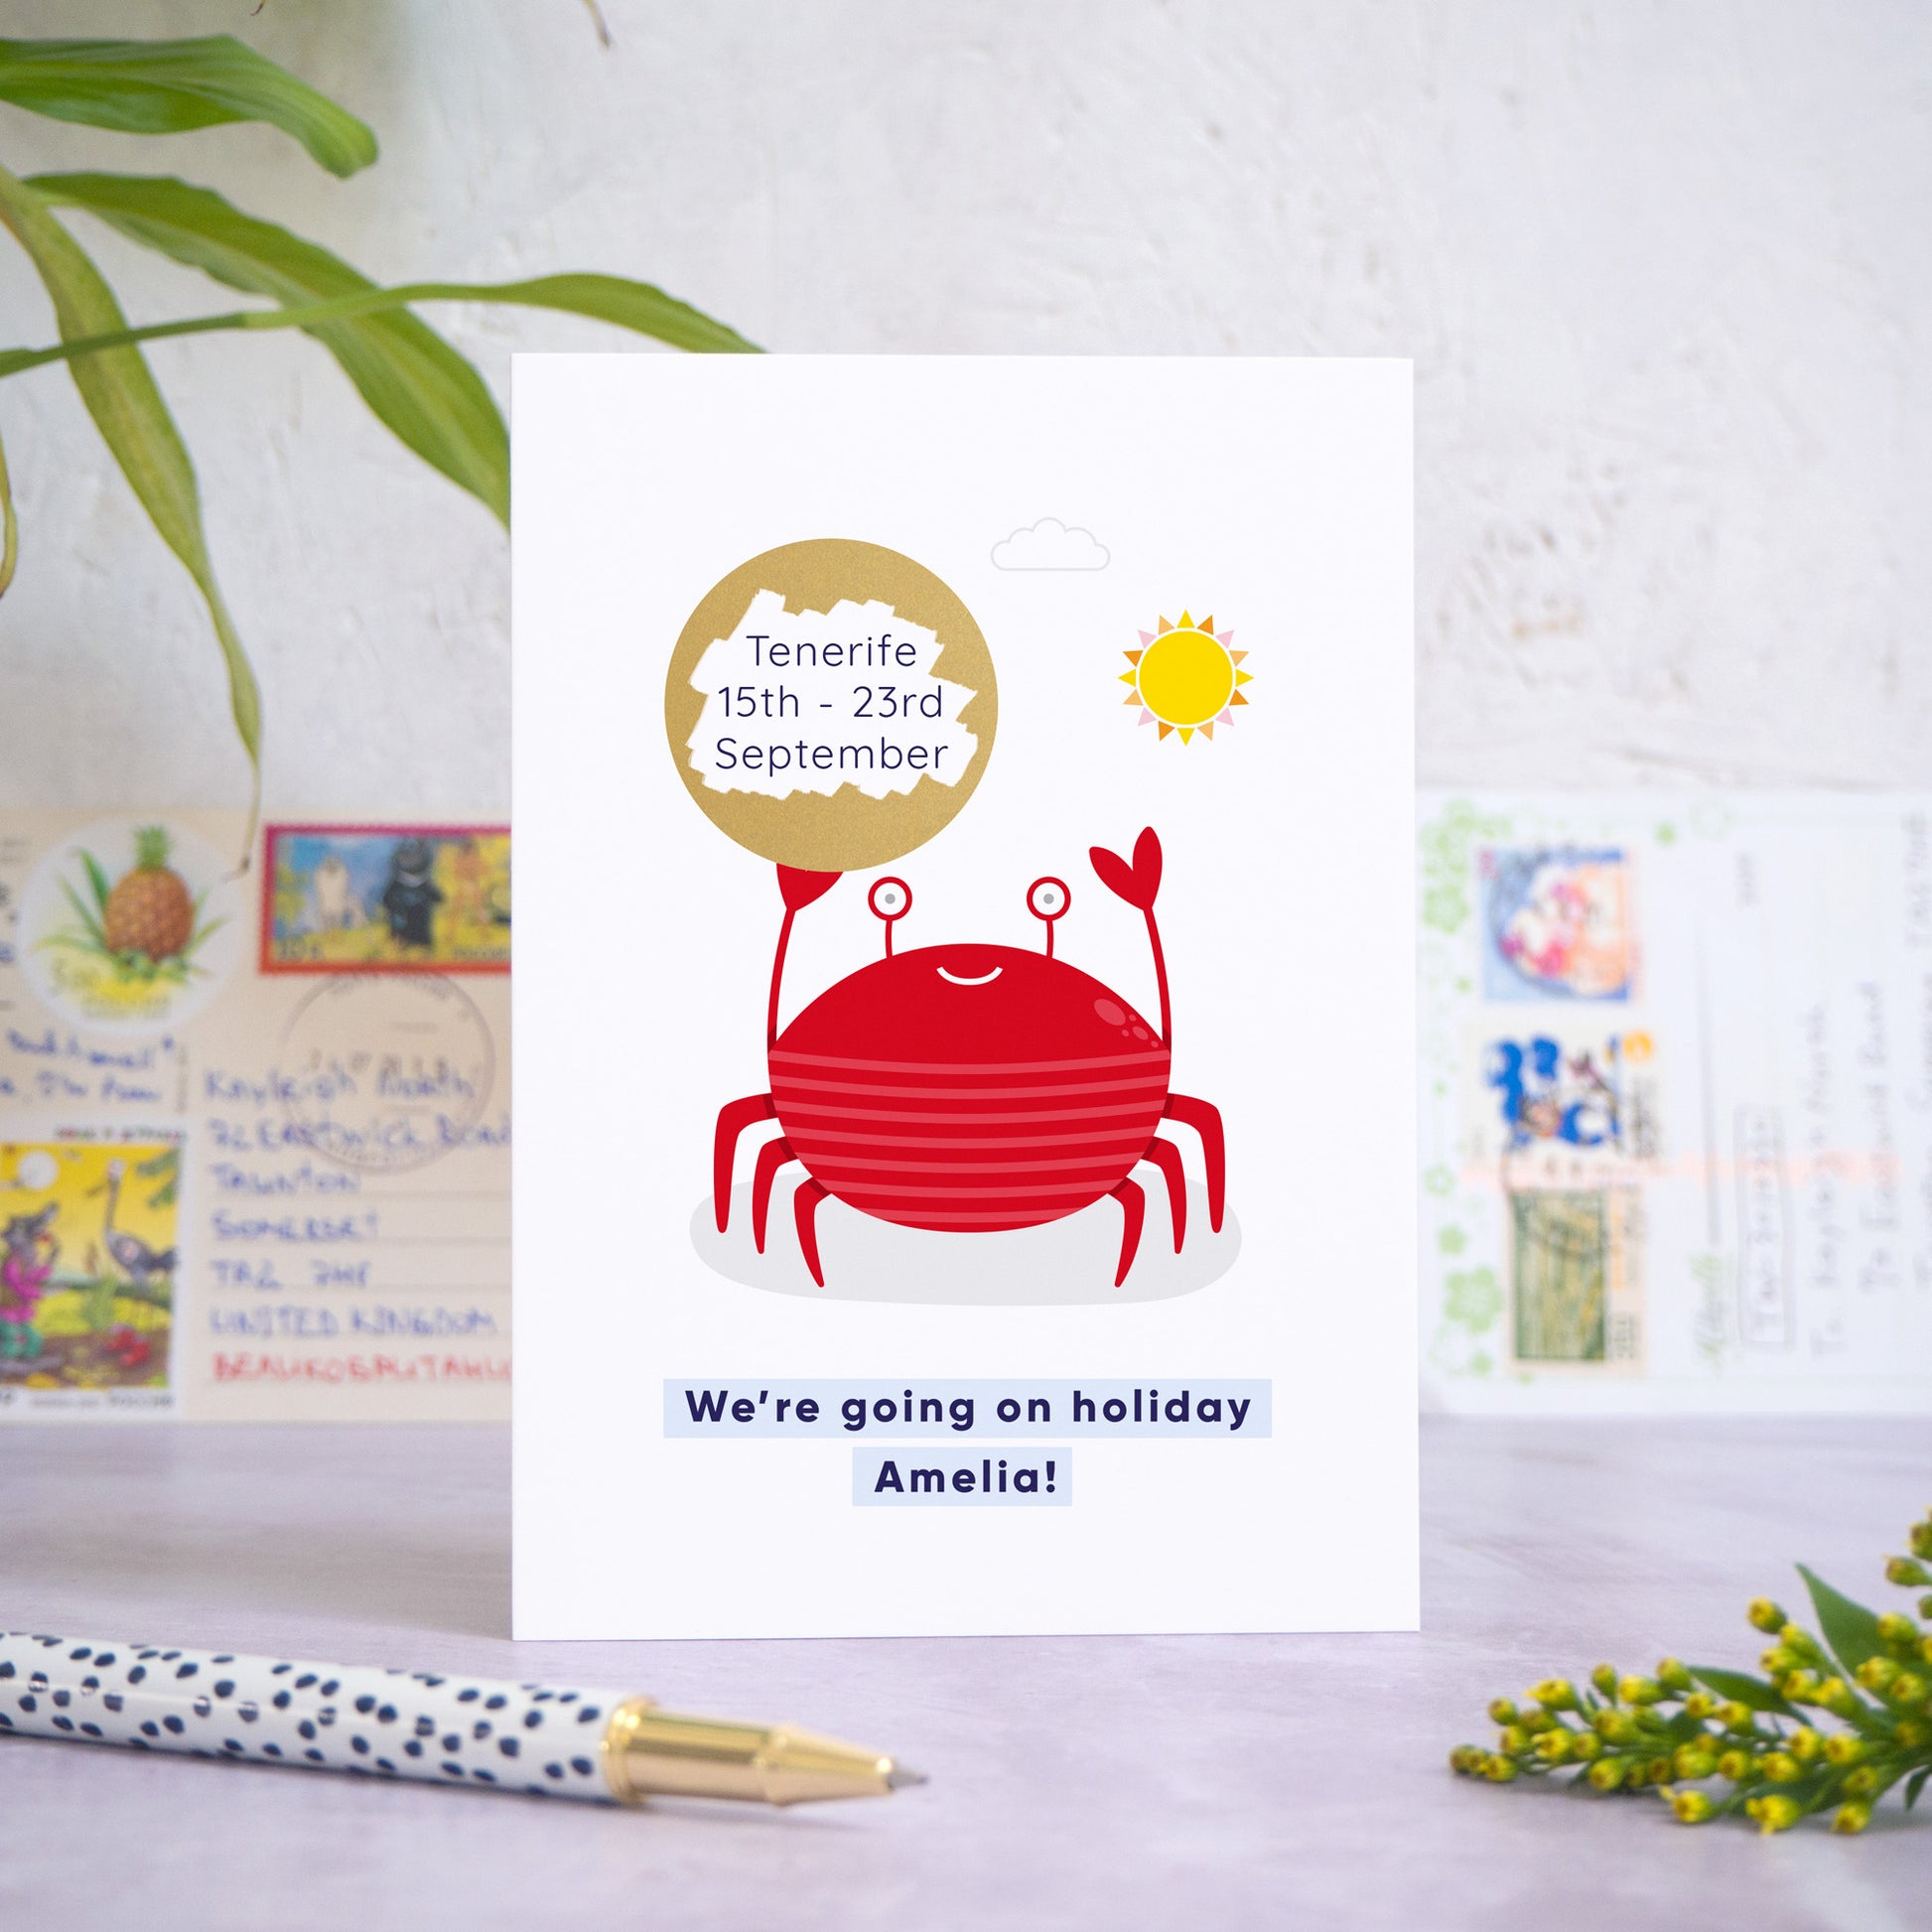 A seaside holiday reveal scratch card featuring a friendly red crab holding the gold scratch panel. The gold panel has been scratched off to reveal the holiday destination. Beneath the crab illustration the text reads: “we’re going on holiday Amelia”. The card is standing on a grey surface with postcards in the background and a pen and foliage in the foreground.